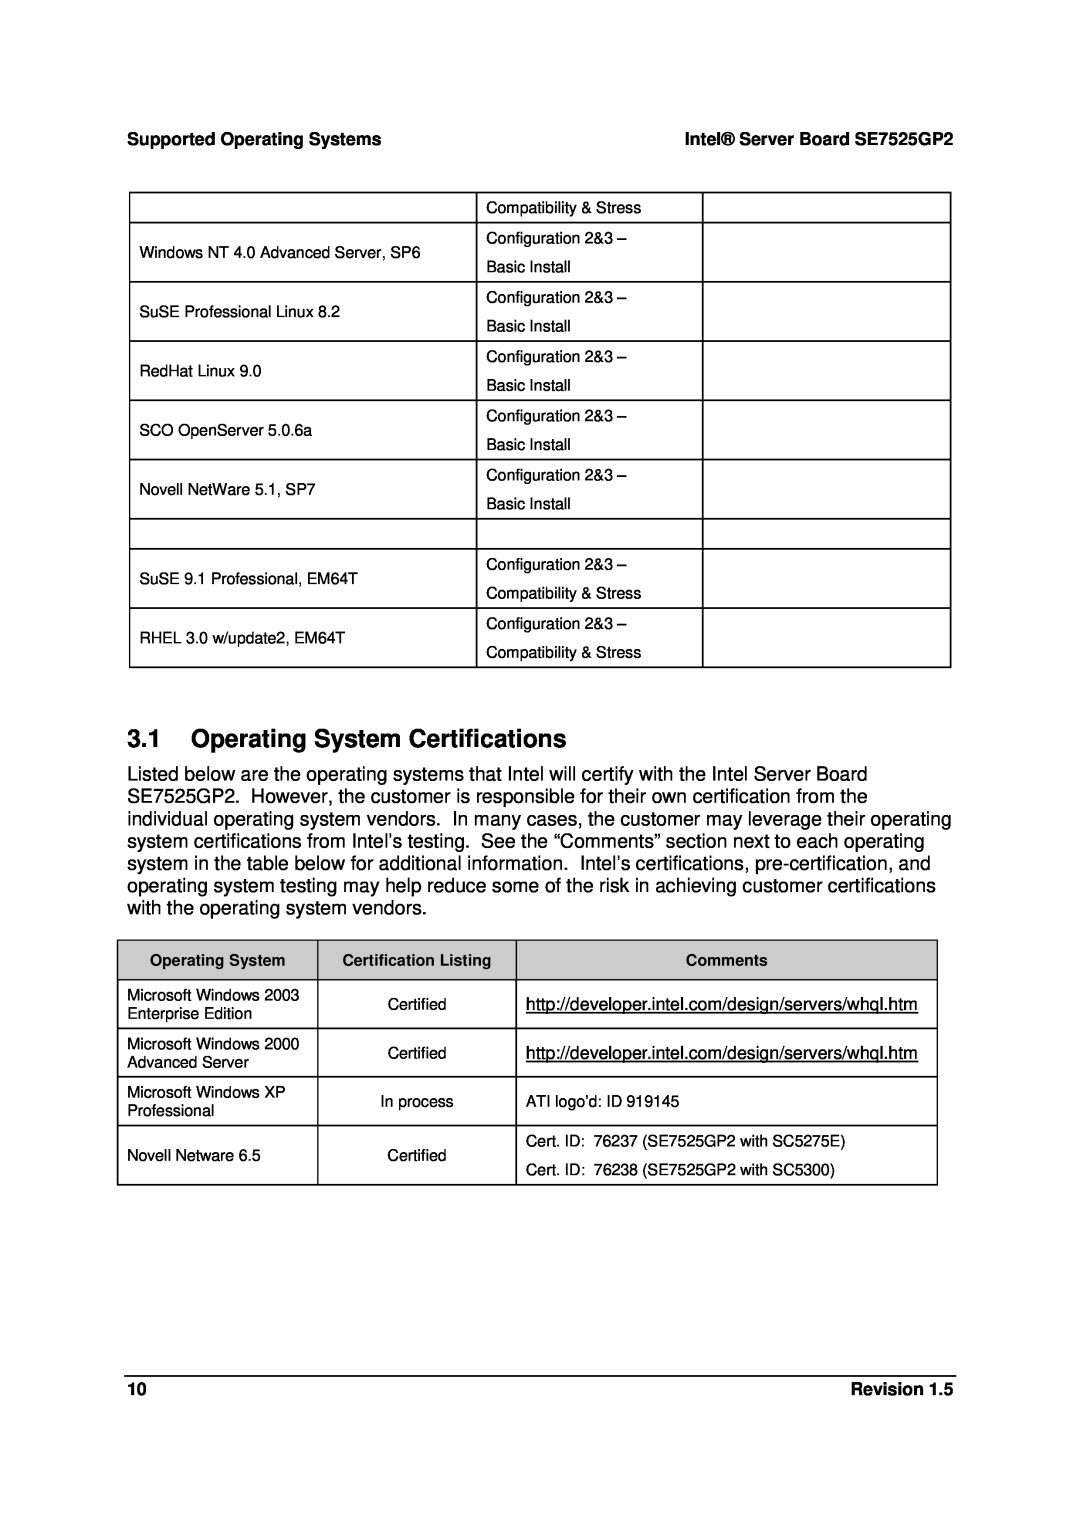 Intel SE7525GP2 manual 3.1Operating System Certifications, Supported Operating Systems 